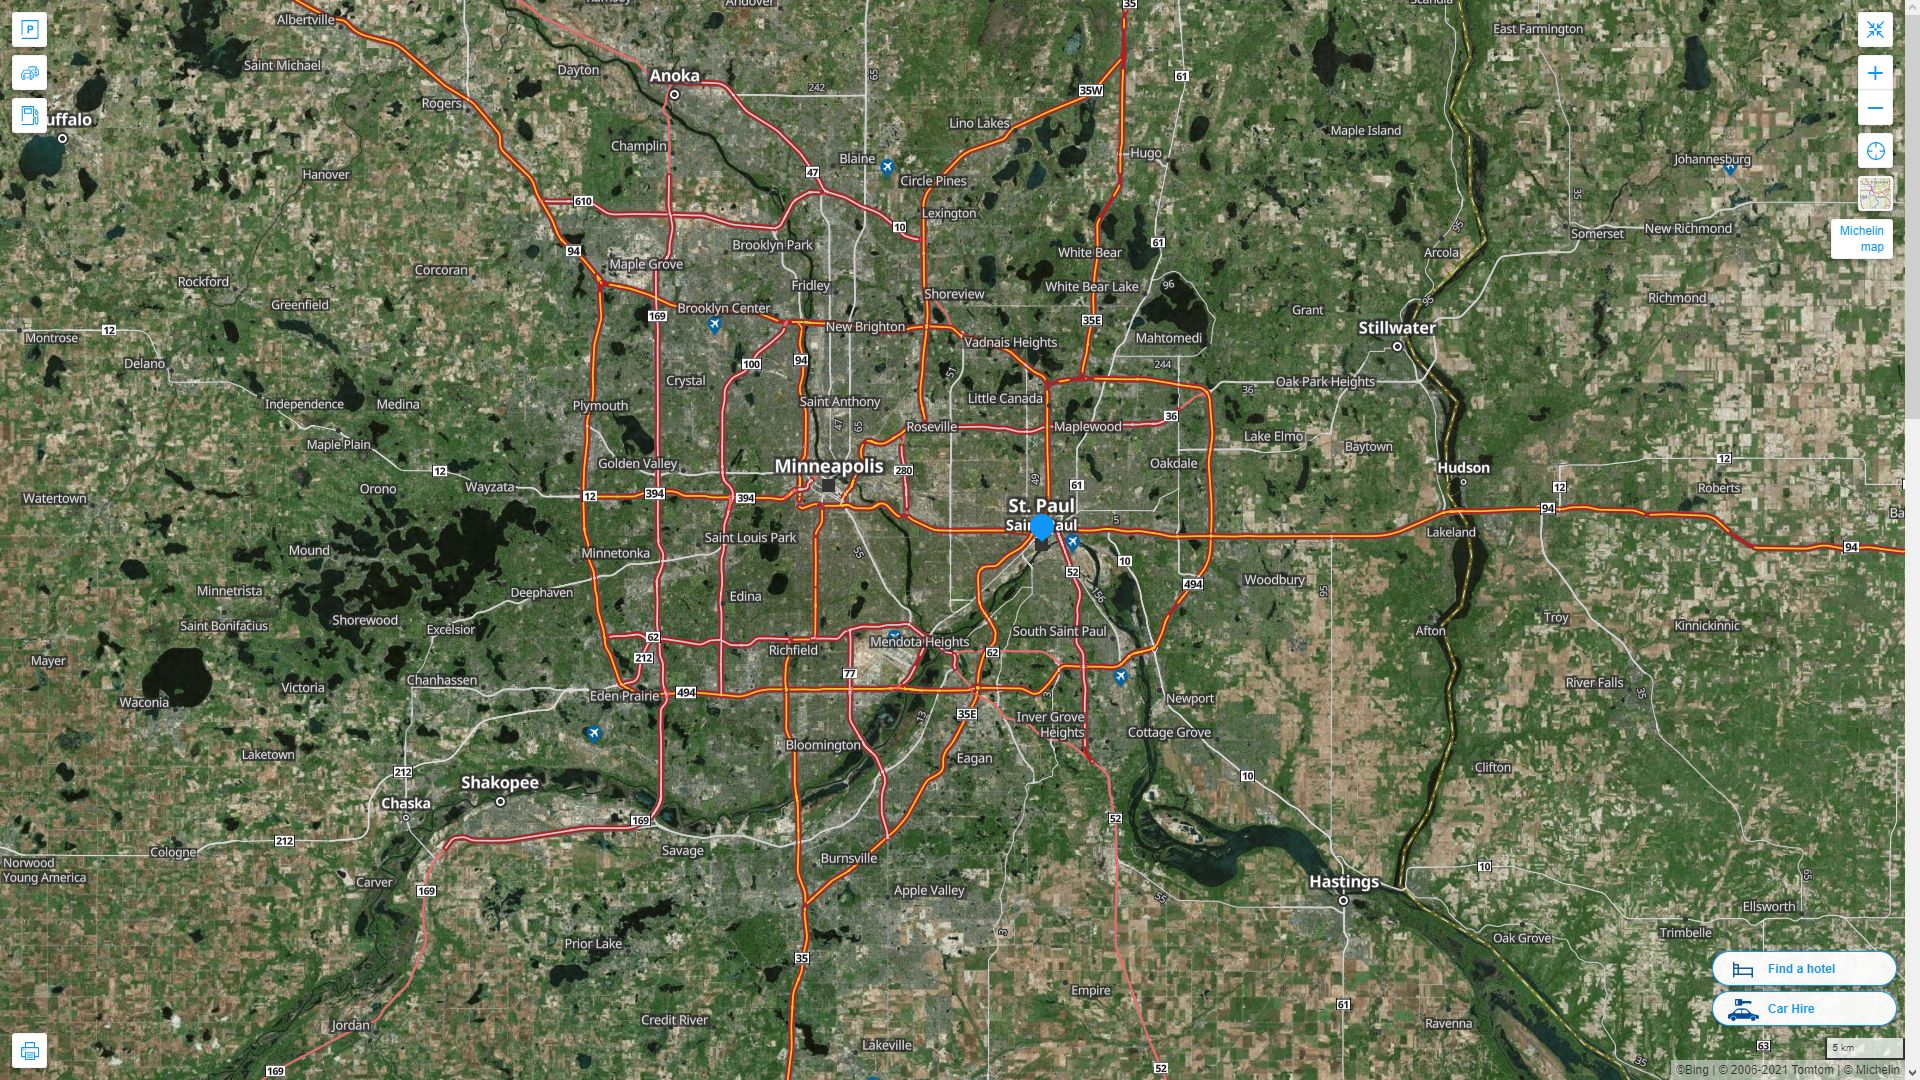 St. Paul Minnesota Highway and Road Map with Satellite View